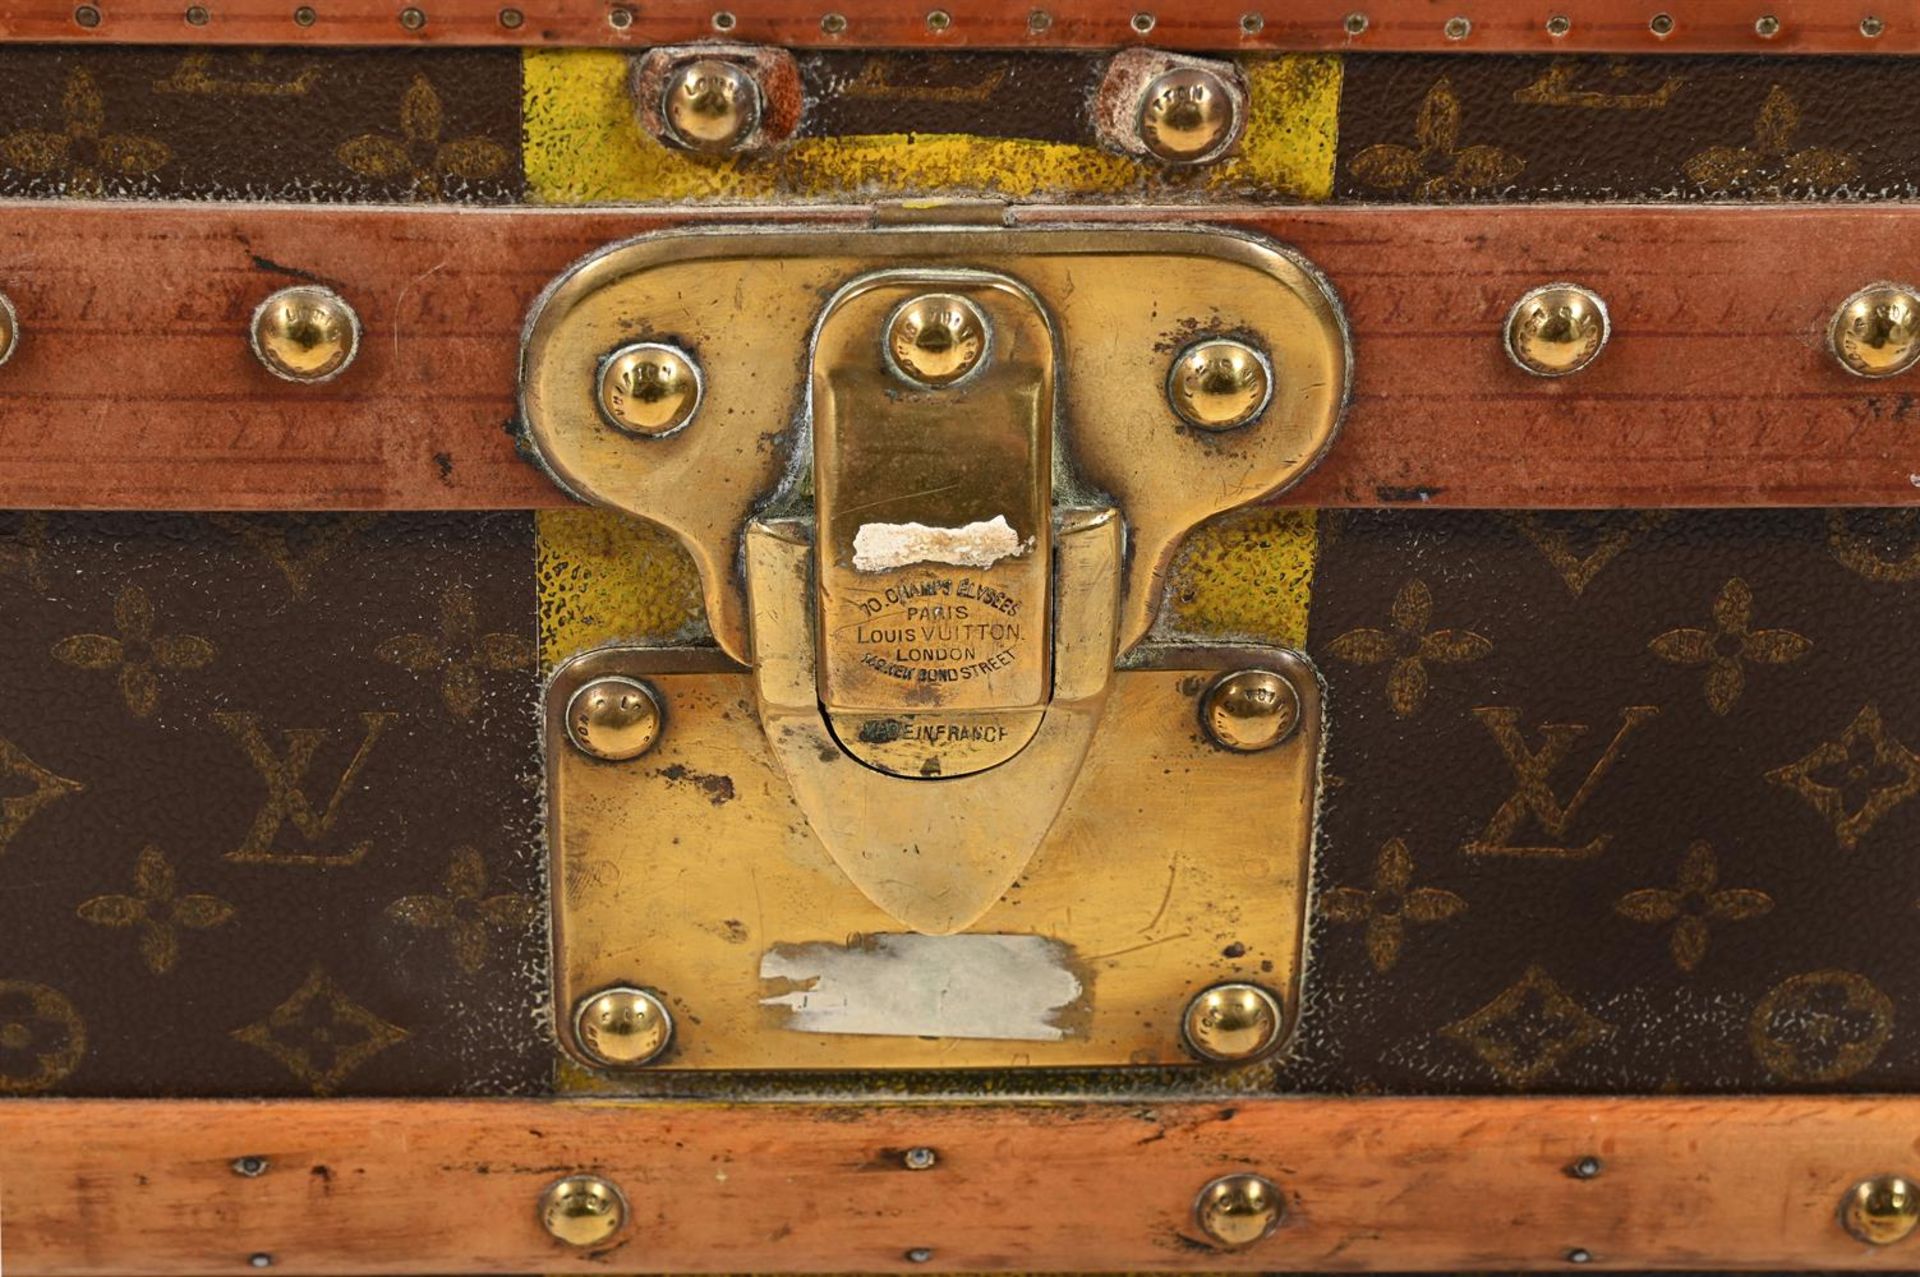 LOUIS VUITTON, A MONOGRAMMED COATED CANVAS HARD TRAVELLING TRUNK - Image 4 of 4